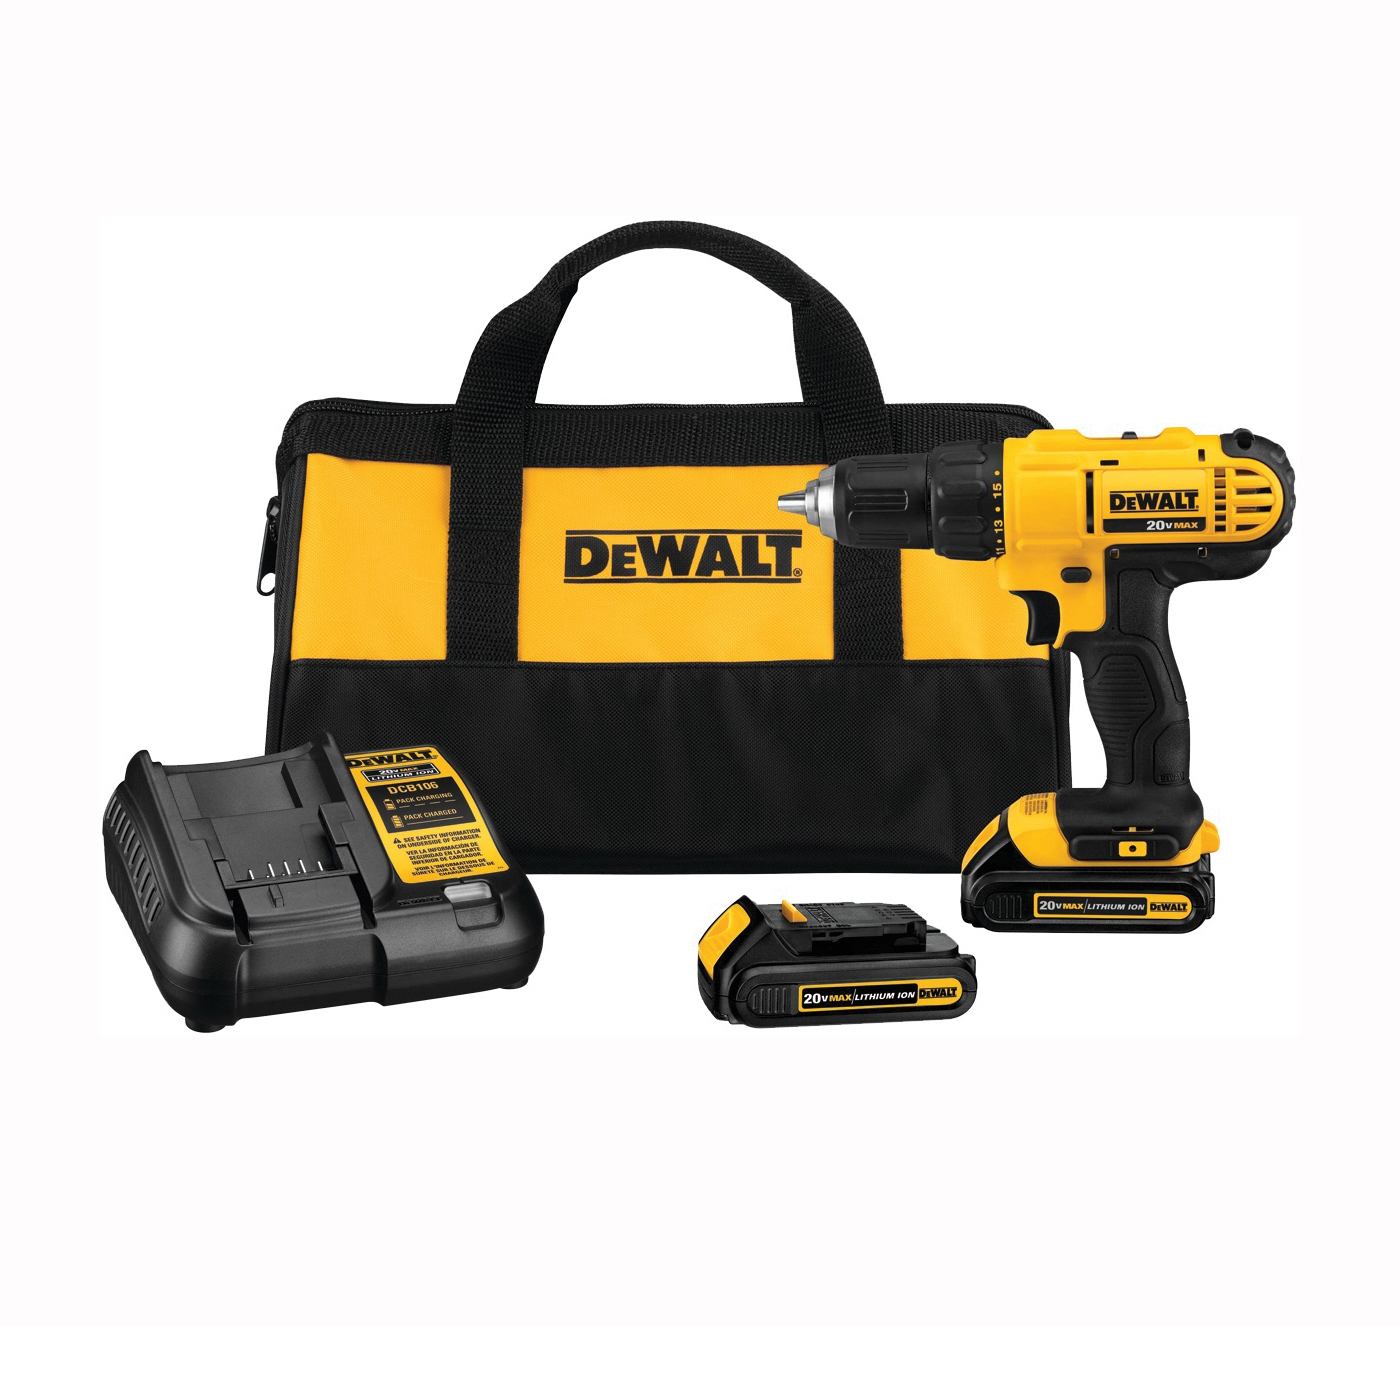 DCD771C2 Drill/Driver Kit, Battery Included, 20 V, 1/2 in Chuck, Keyless Chuck